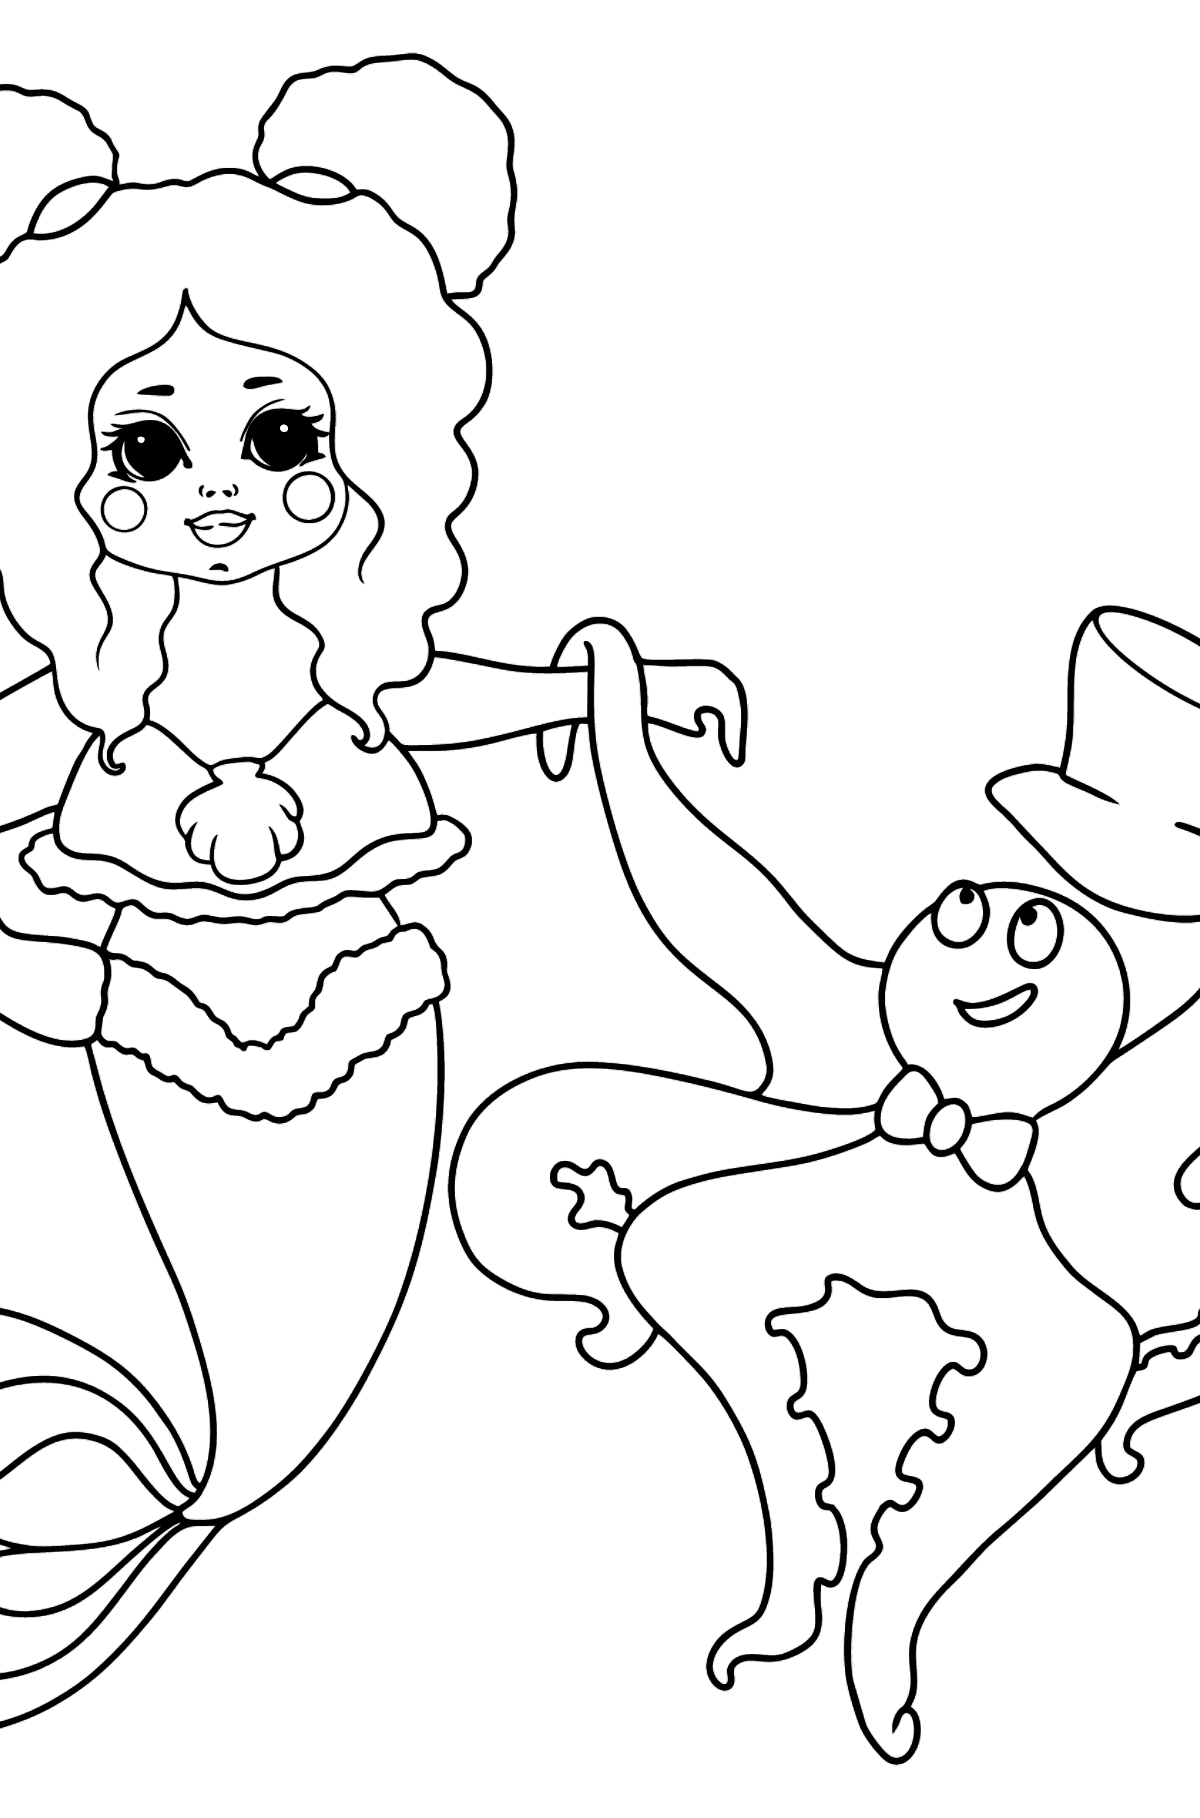 Mermaid and Octopus coloring page - Coloring Pages for Kids